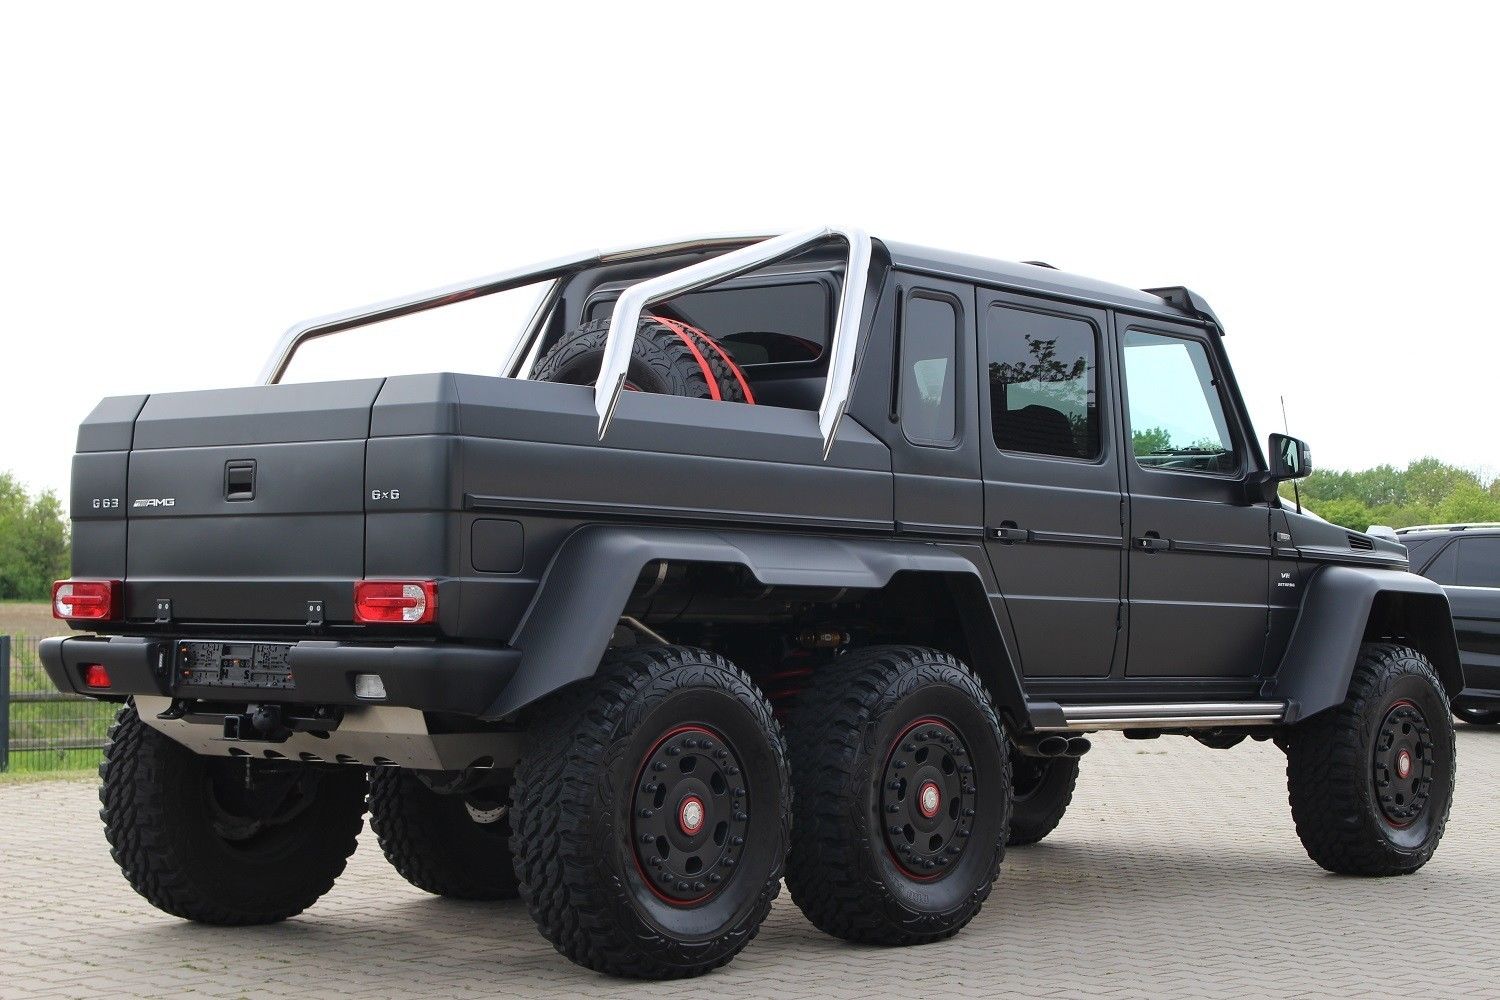 Mercedes Benz G63 Amg 6x6 Luxury Pulse Cars Germany For Sale On Luxurypulse